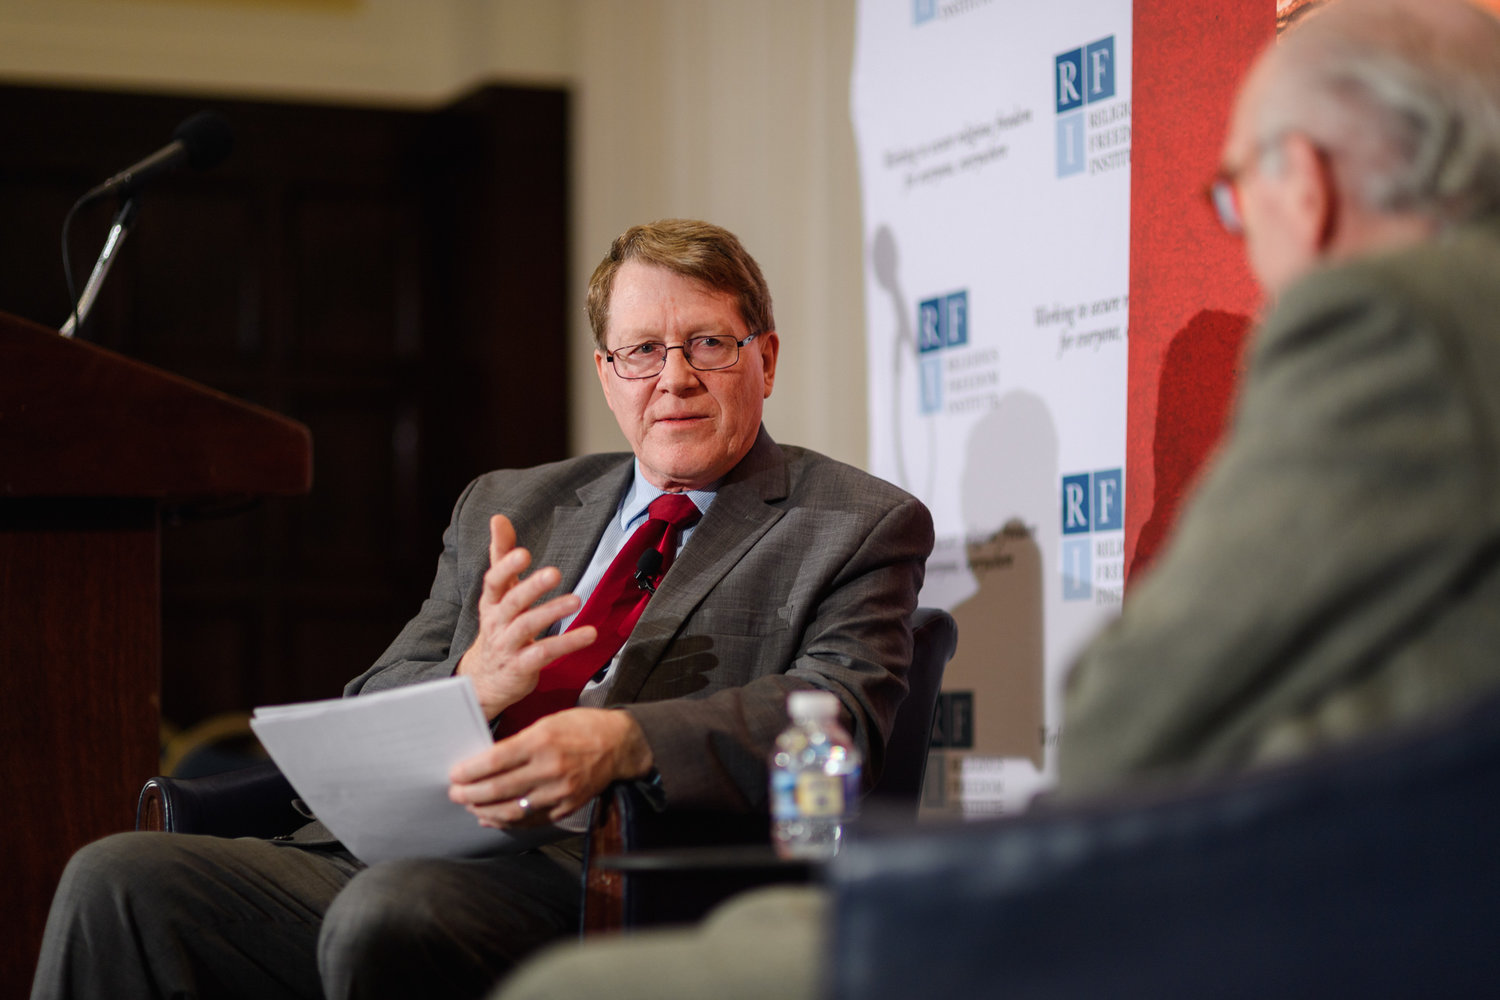  Kent Hill, Executive Director, Religious Freedom Institute, interviews author Martin Mosebach on what he learned in writing his book on the martyrdom of 21 Christians killed in Libya.  Photo: RFI/Nathan Mitchell 